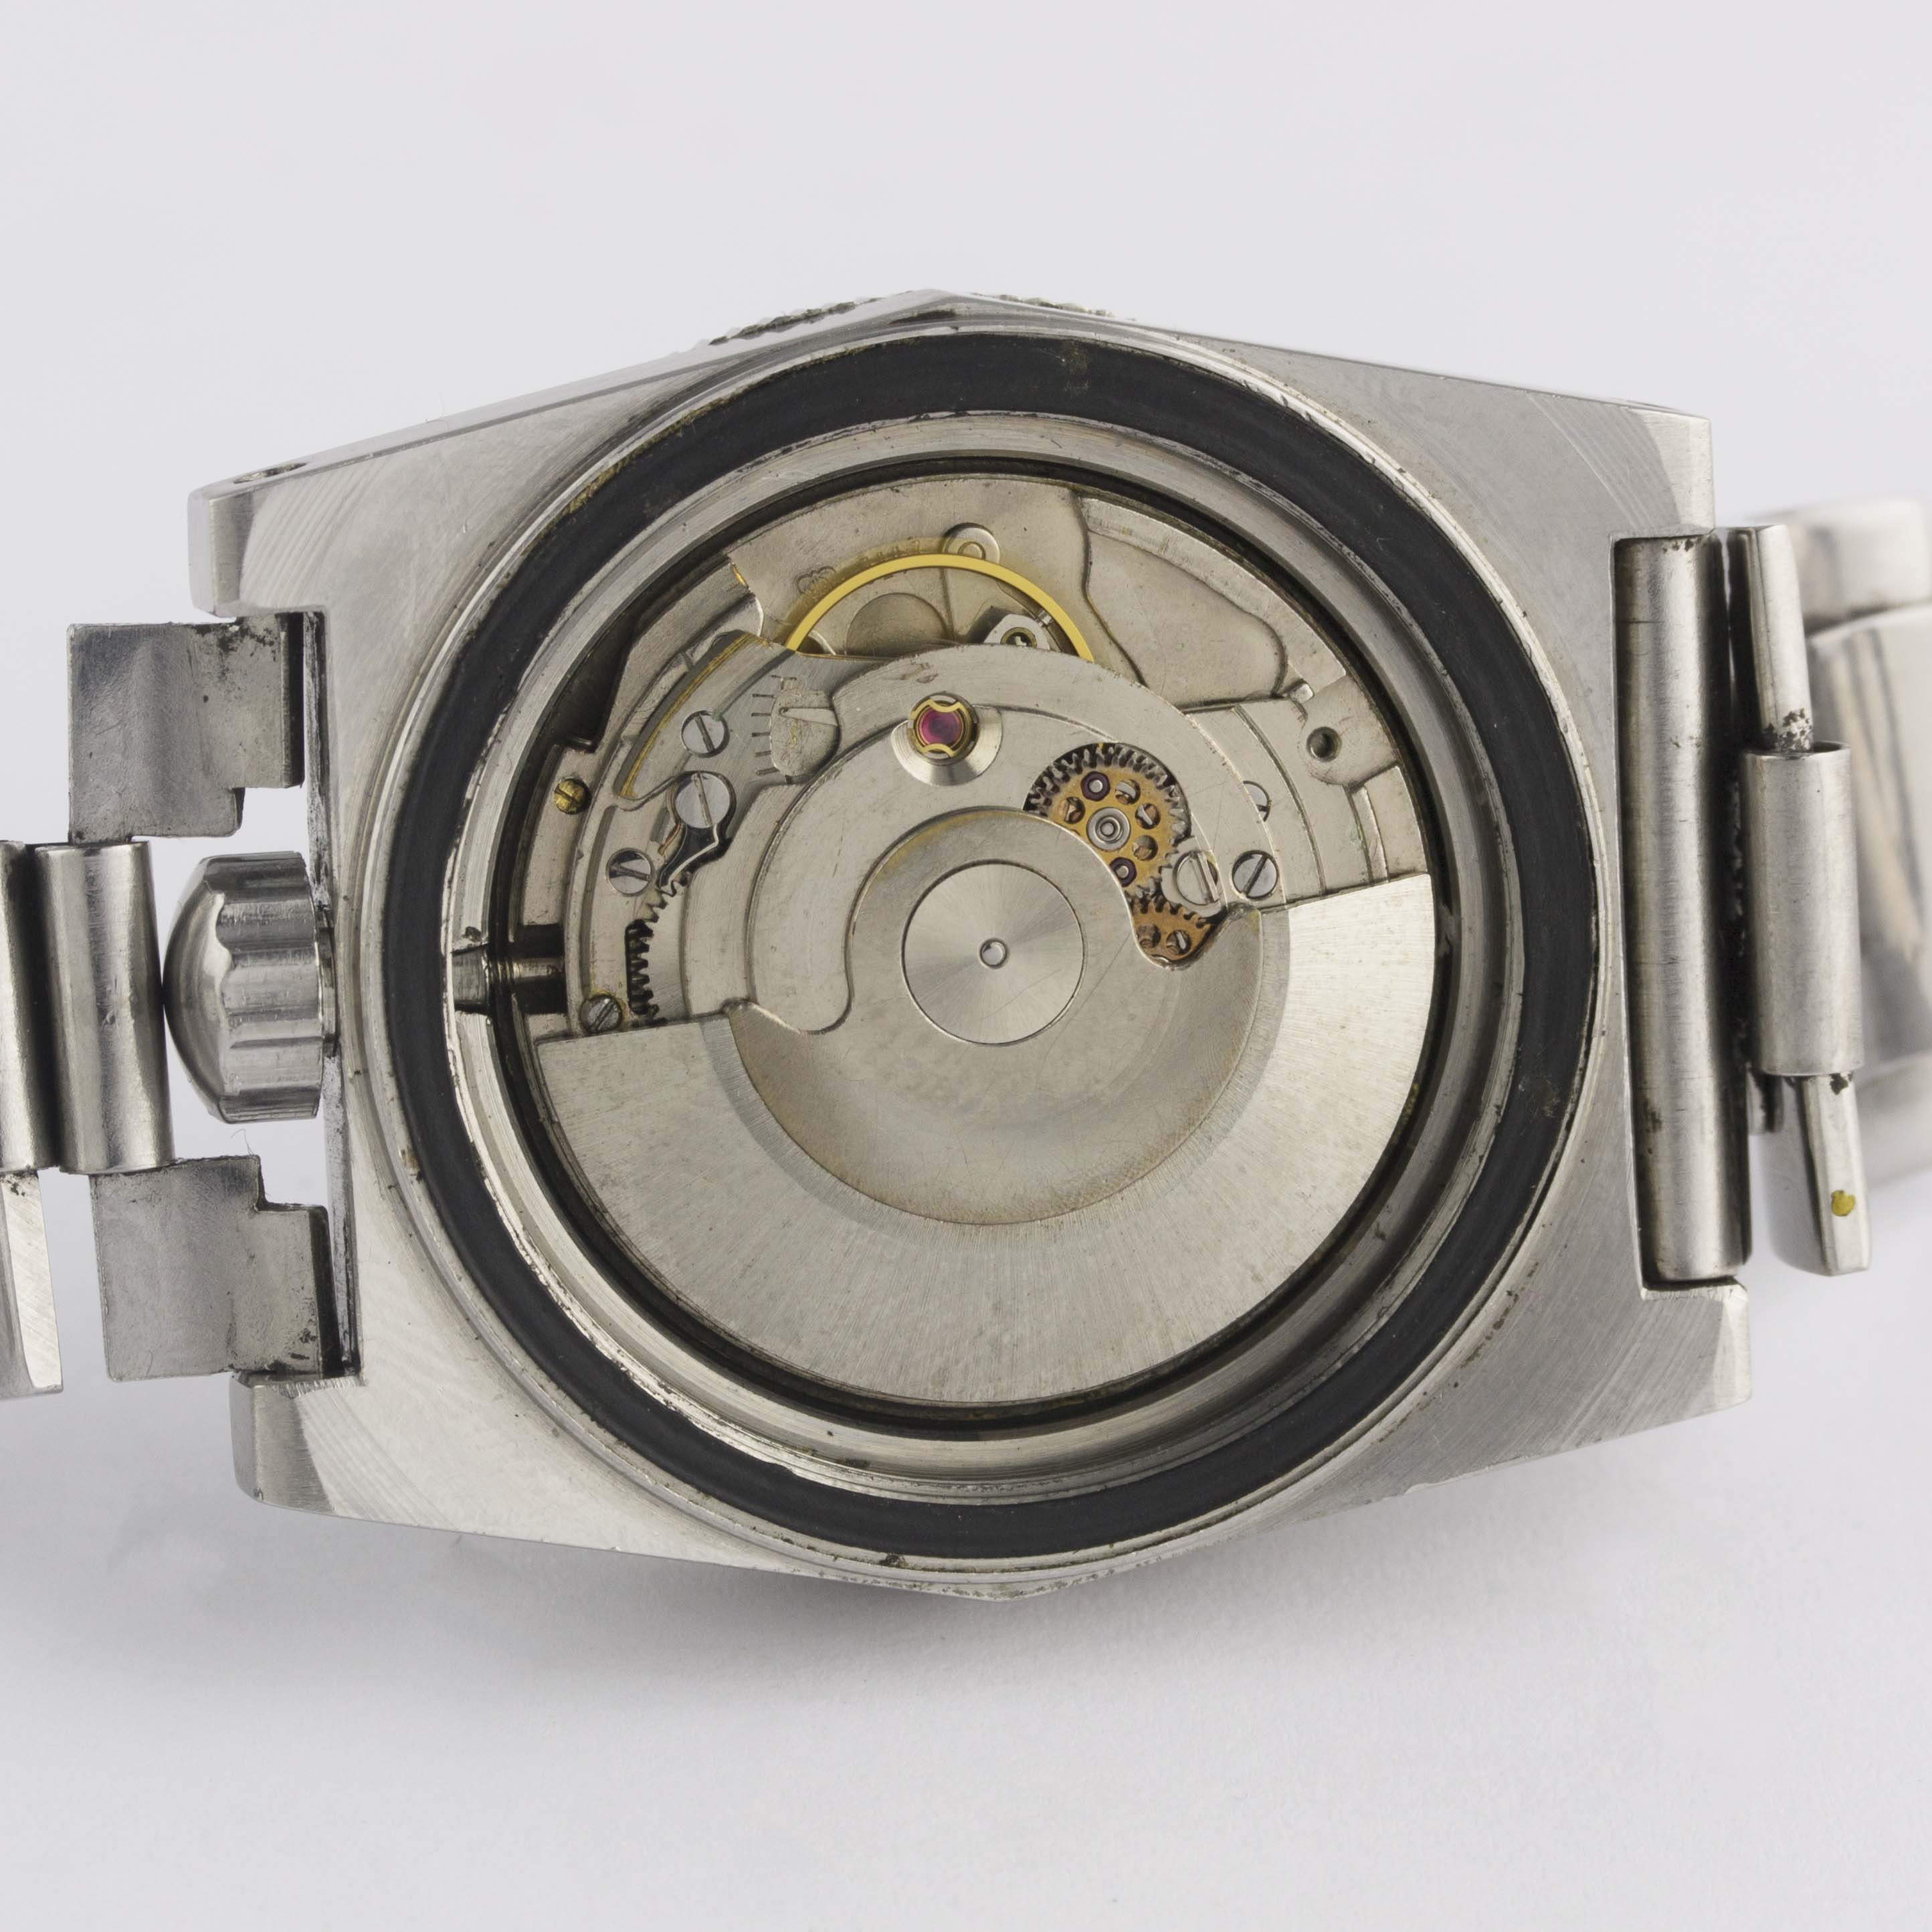 A VERY RARE GENTLEMAN'S STAINLESS STEEL Z.R.C. ETANCHE GRANDS FONDS 300M "SERIES III" AUTOMATIC - Image 8 of 11